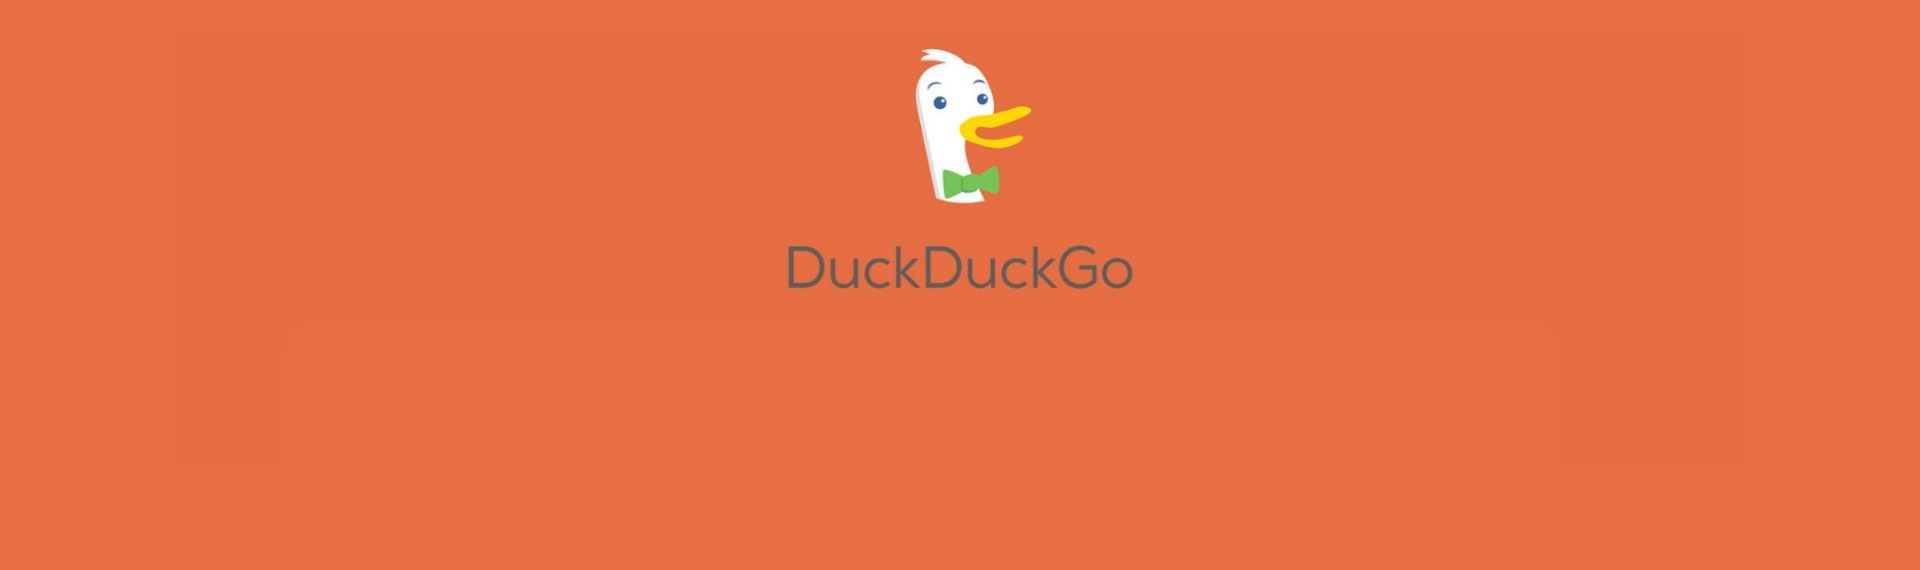 DuckDuckGo Hits a Record 1 Billion Monthly Searches